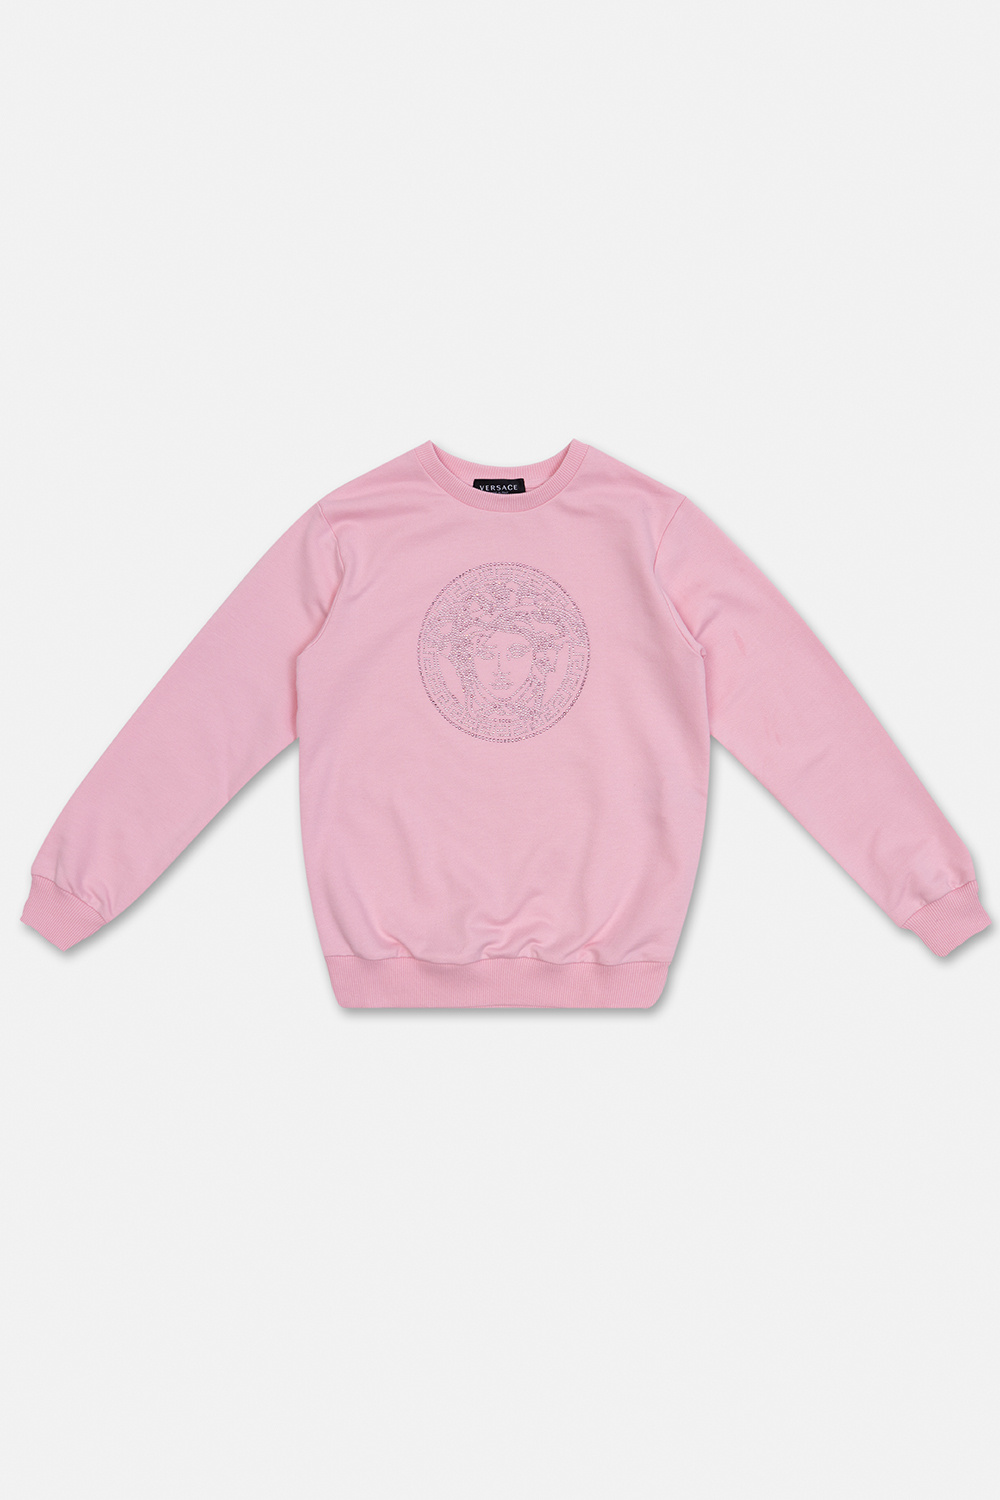 Versace Kids Easy to match to T-shirts or vests